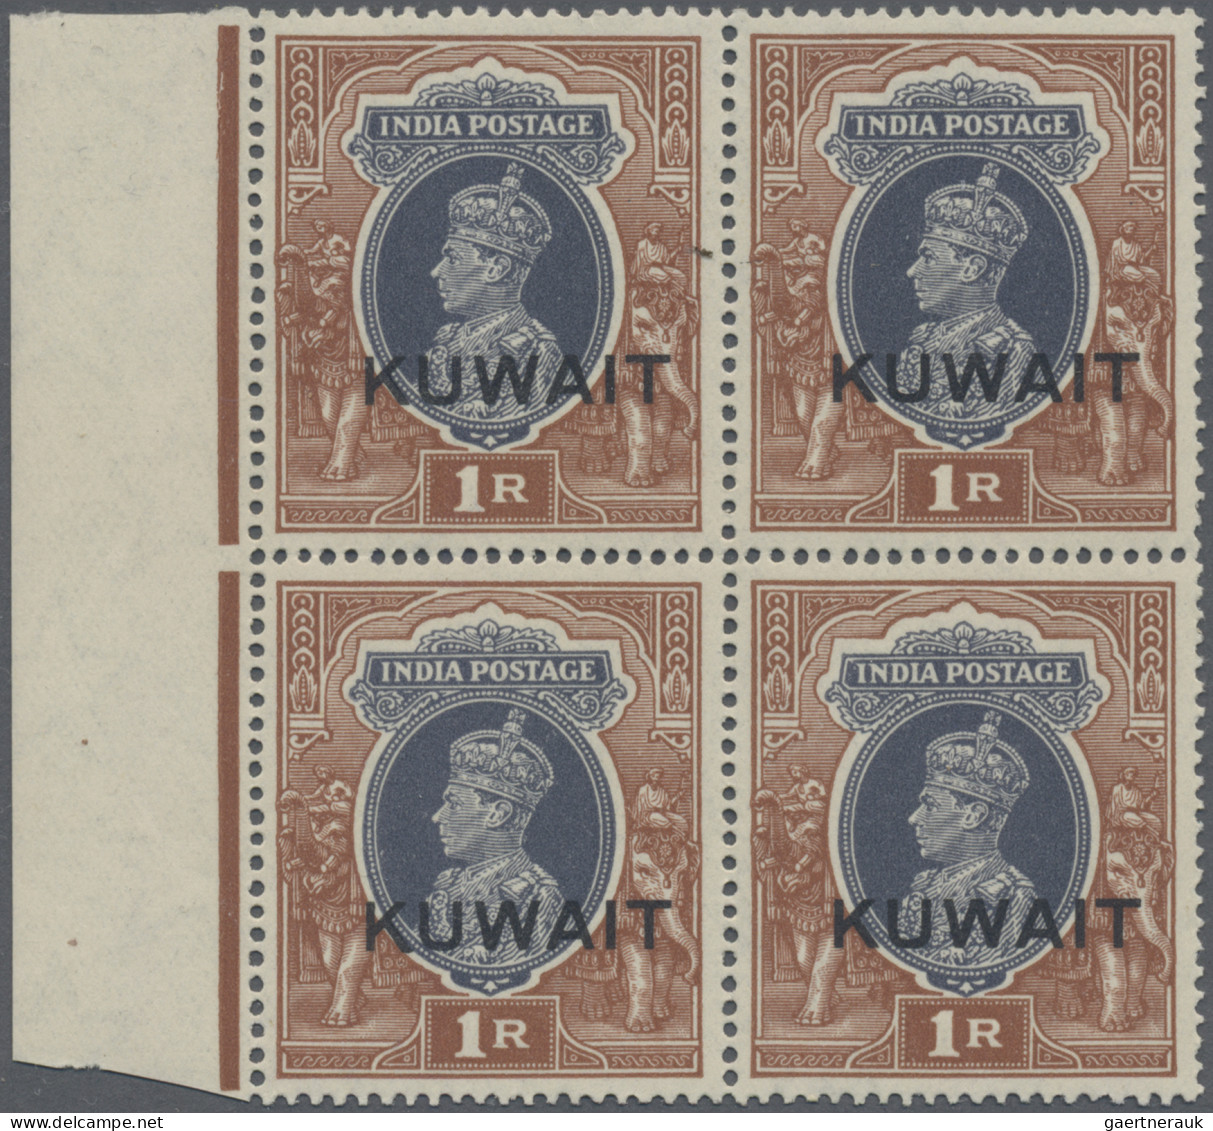 Kuwait: 1939 Complete set of 13 India KGVI. definitives optd. "KUWAIT" each in m